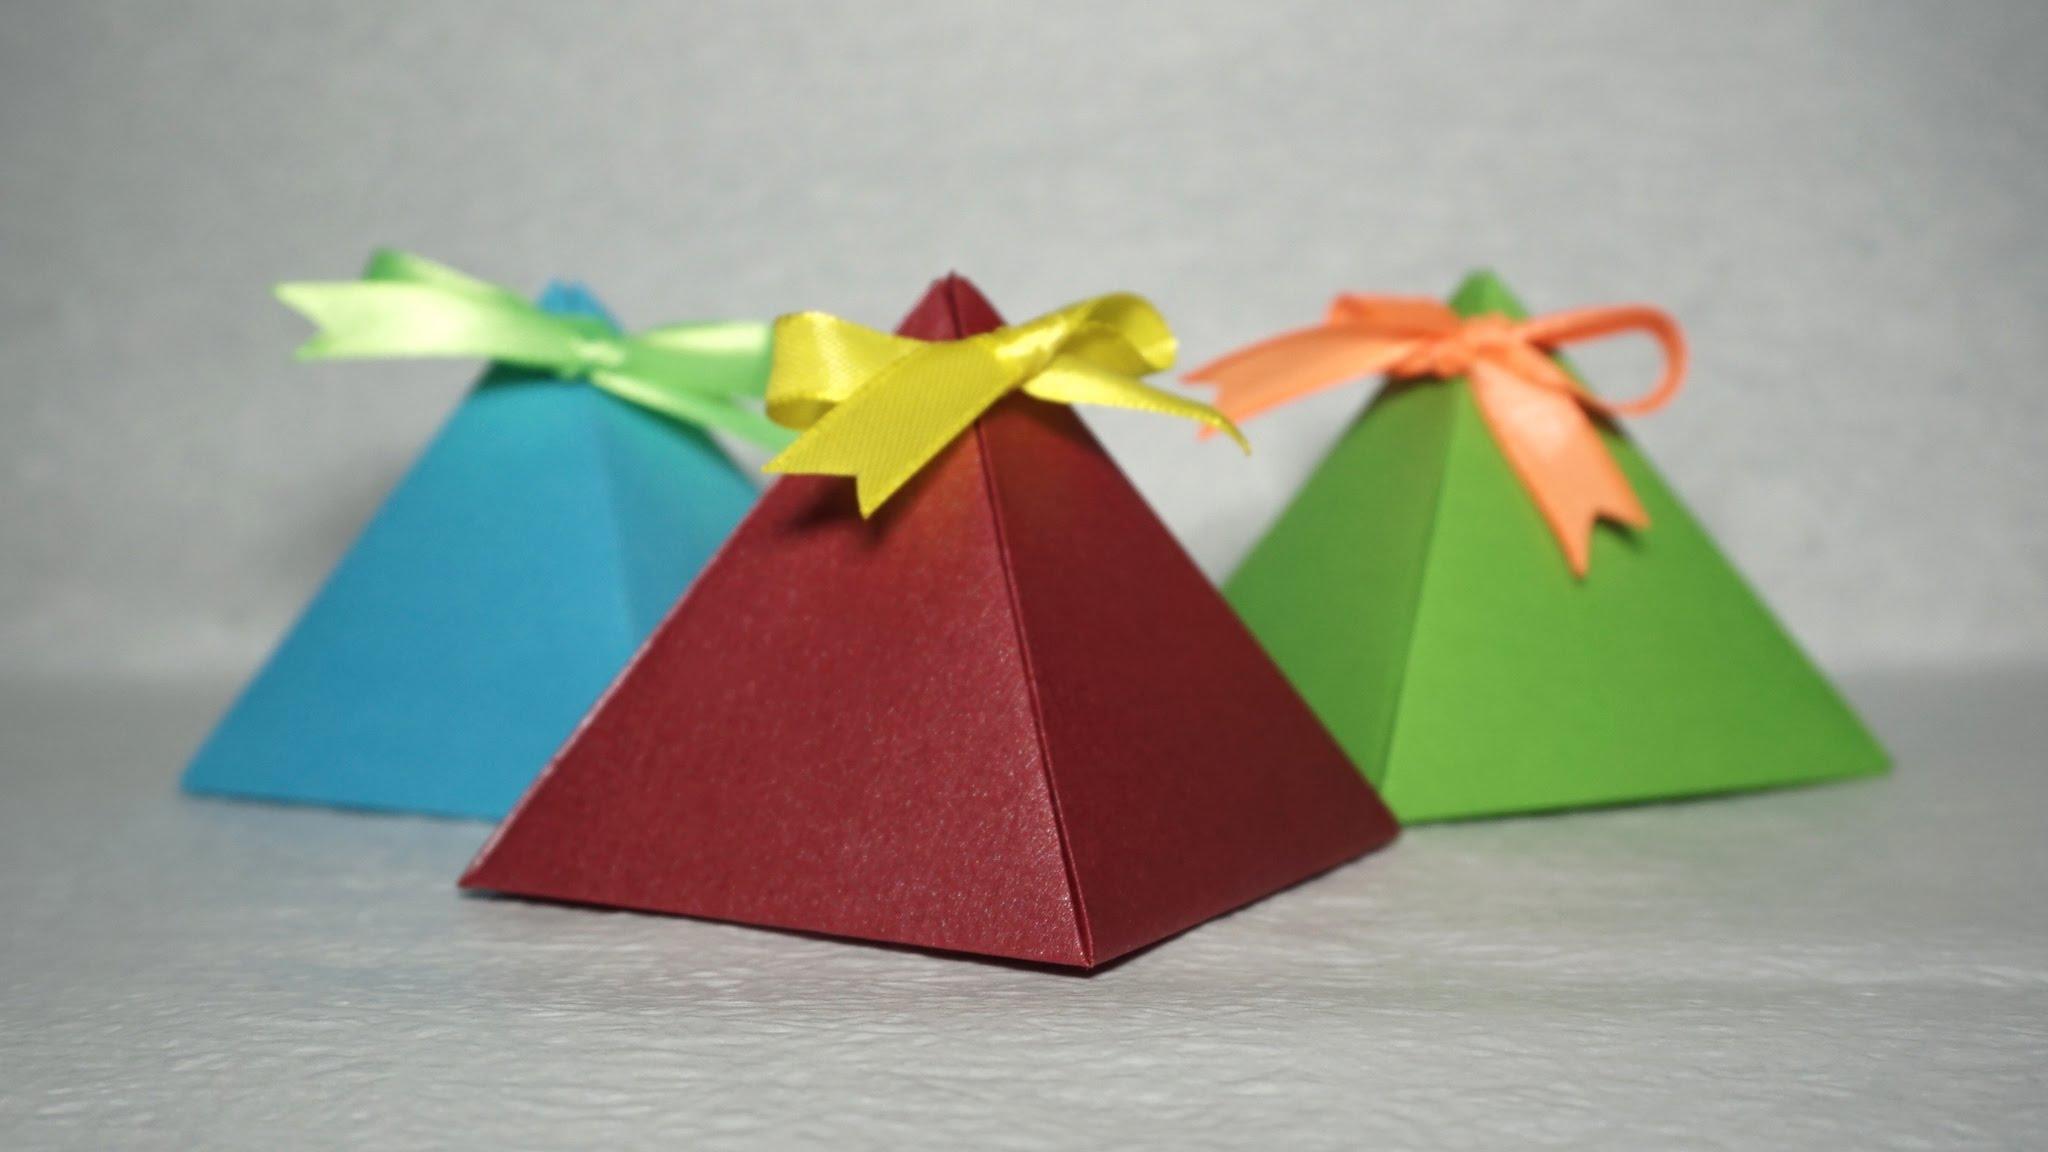 What Is a Prism Shaped Box and What Are the Uses